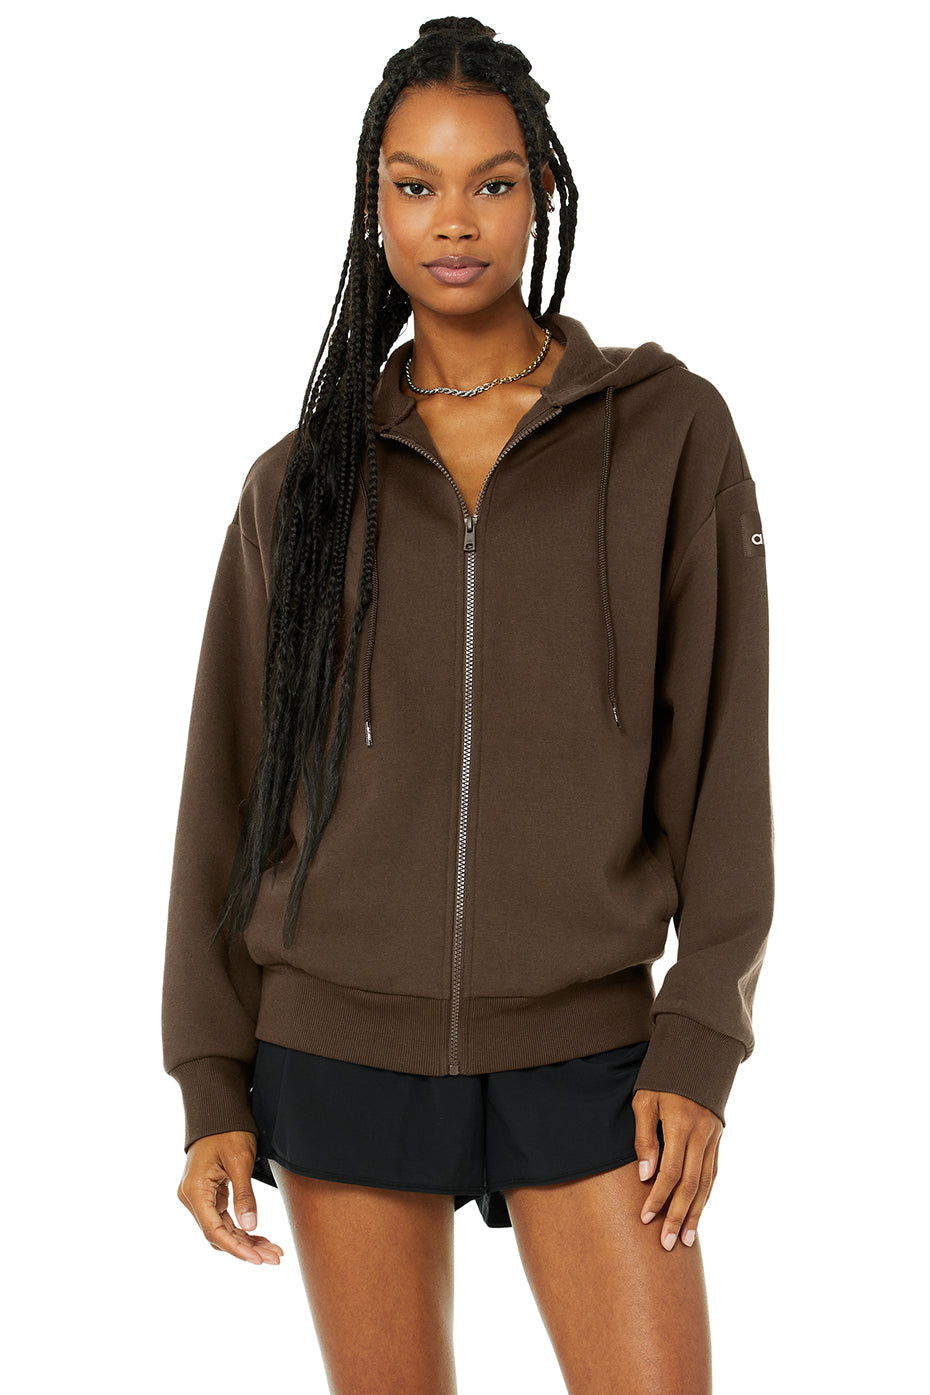 Hype Full Zip Hoodie in Espresso by Alo Yoga - Work Well Daily